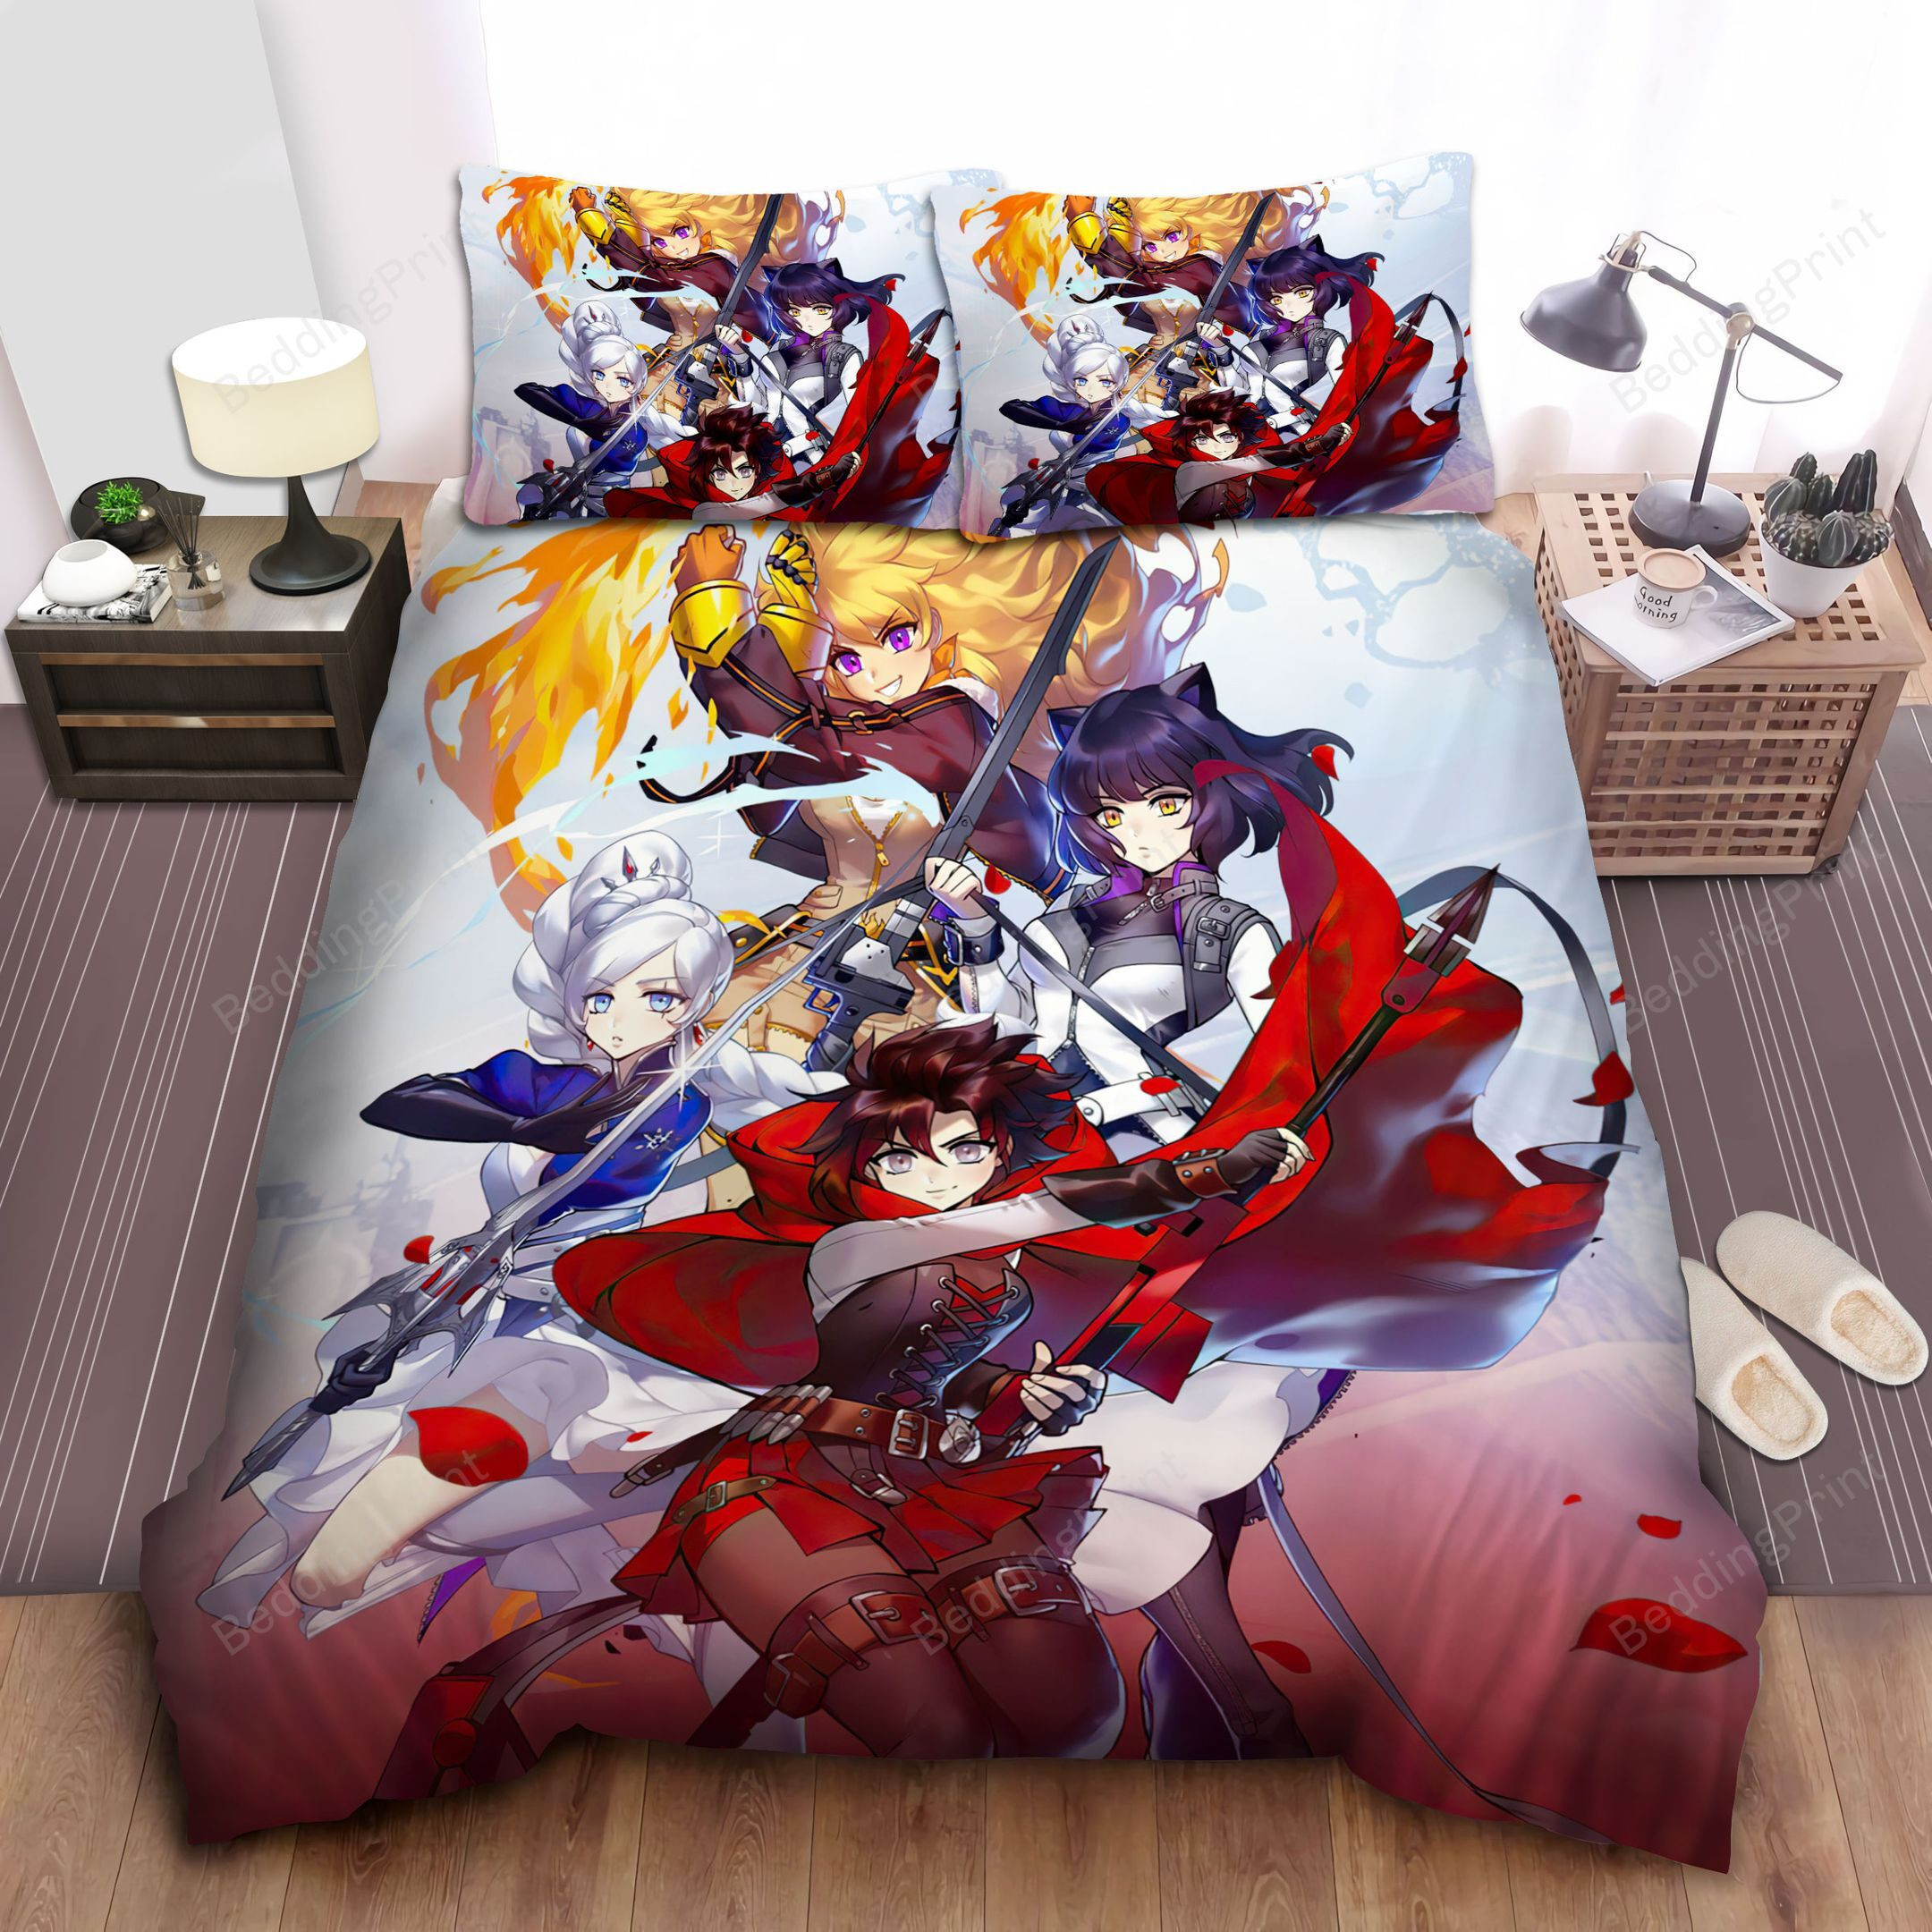 Rwby Series Bed Sheets Duvet Cover Bedding Sets. PLEASE NOTE: This is a ...